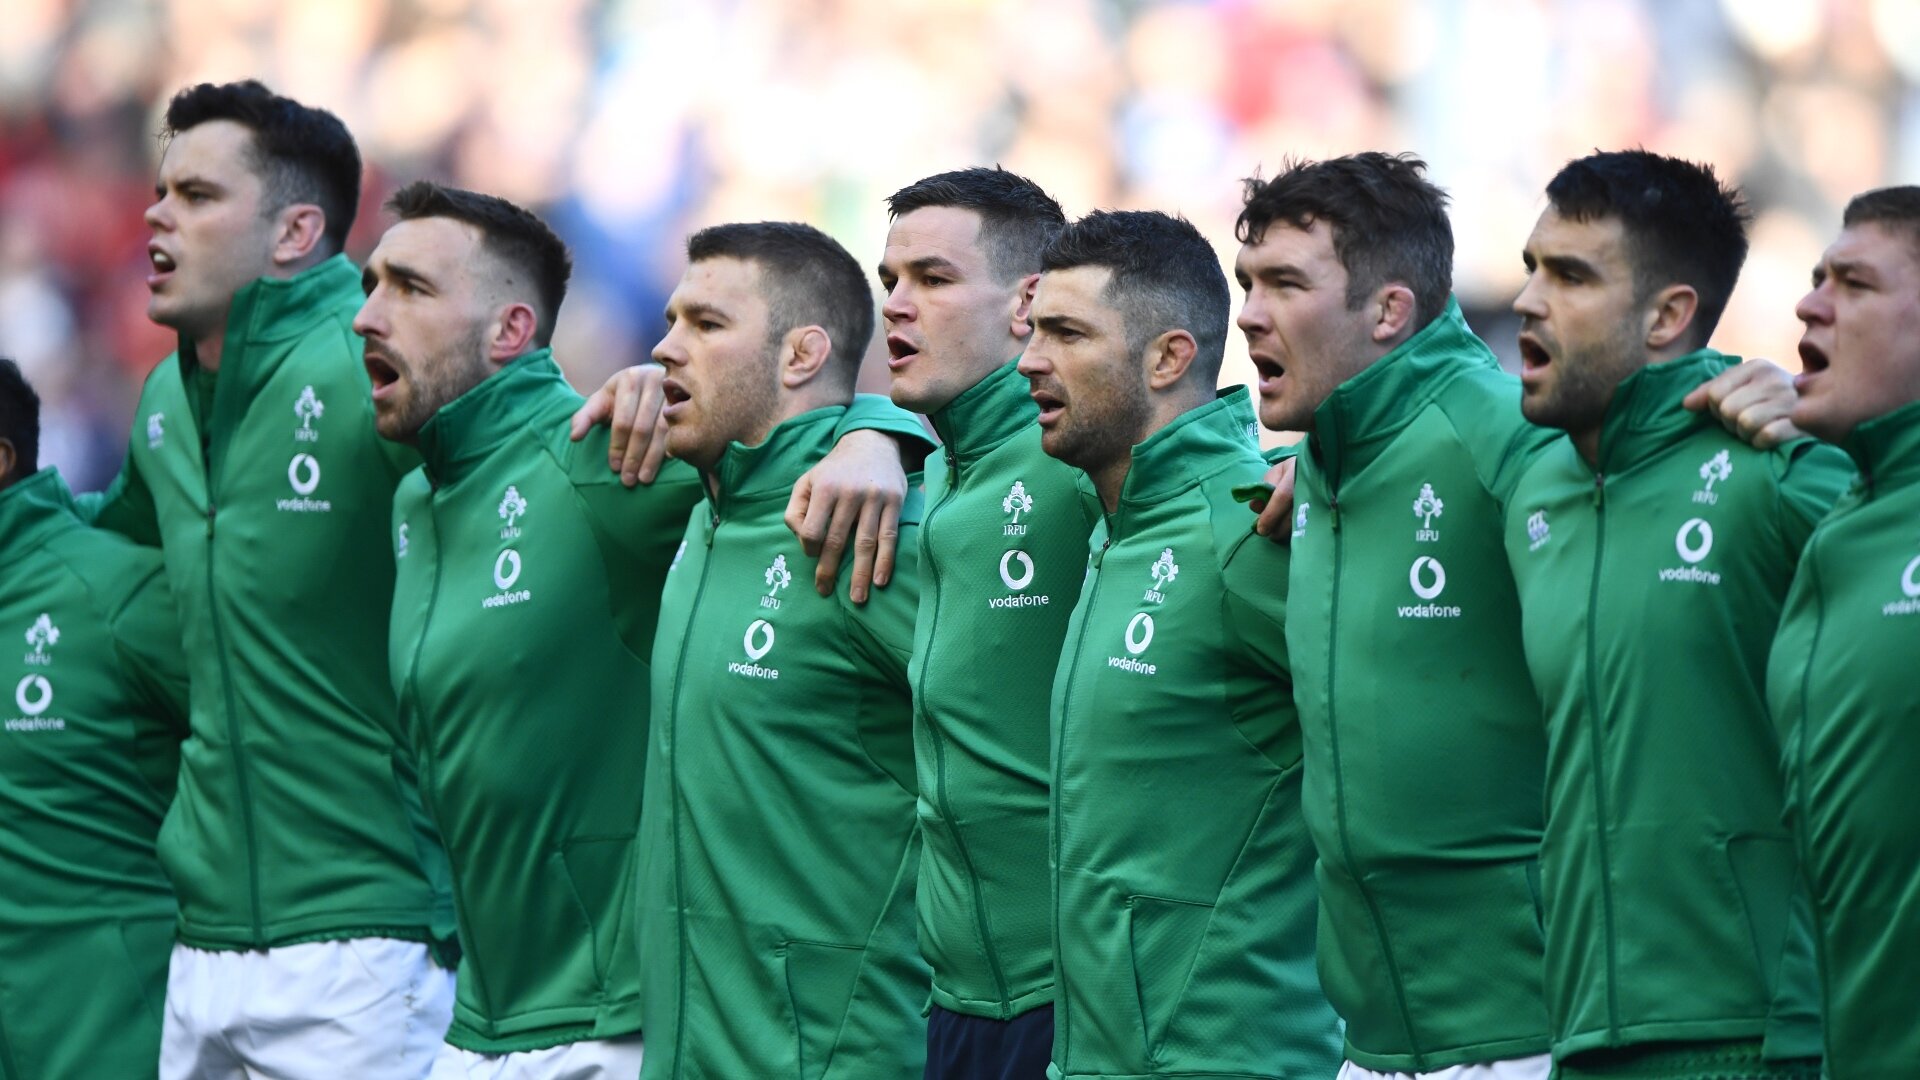 Cash-strapped IRFU receive massive multimillion-euro bailout from Irish Government